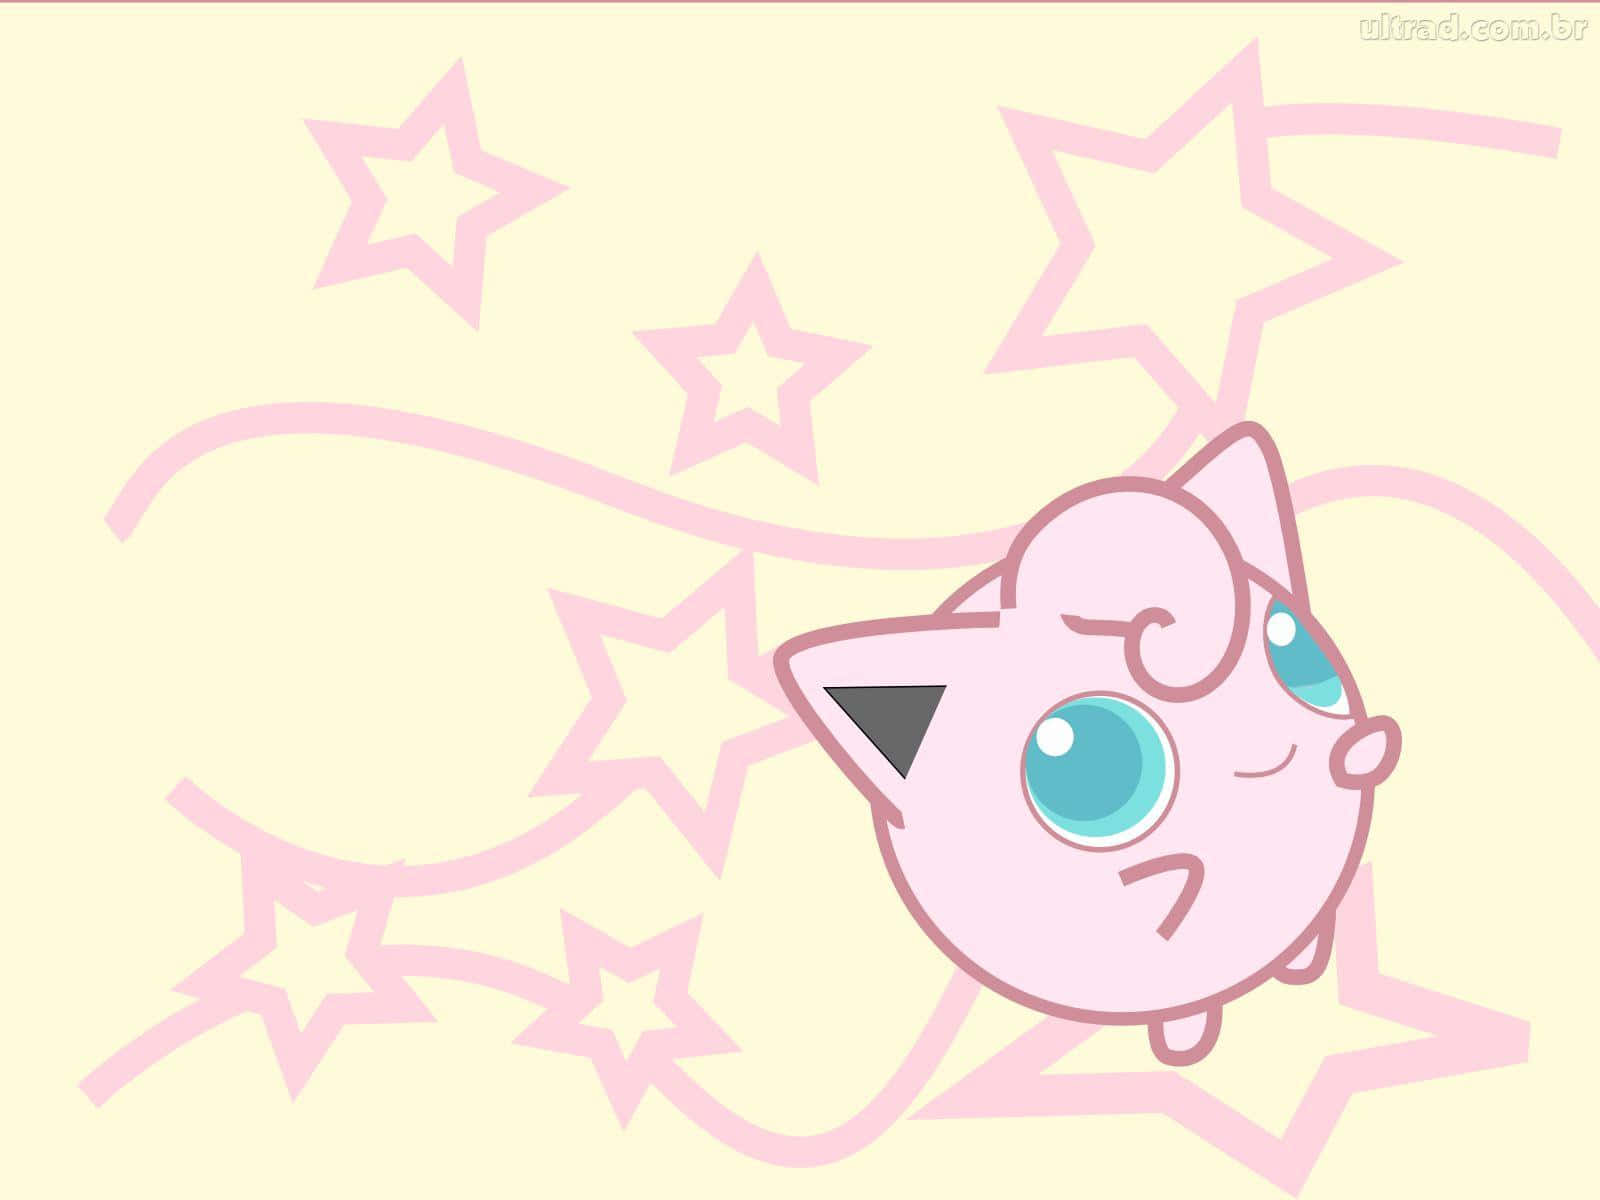 Oultra-fofo Jigglypuff